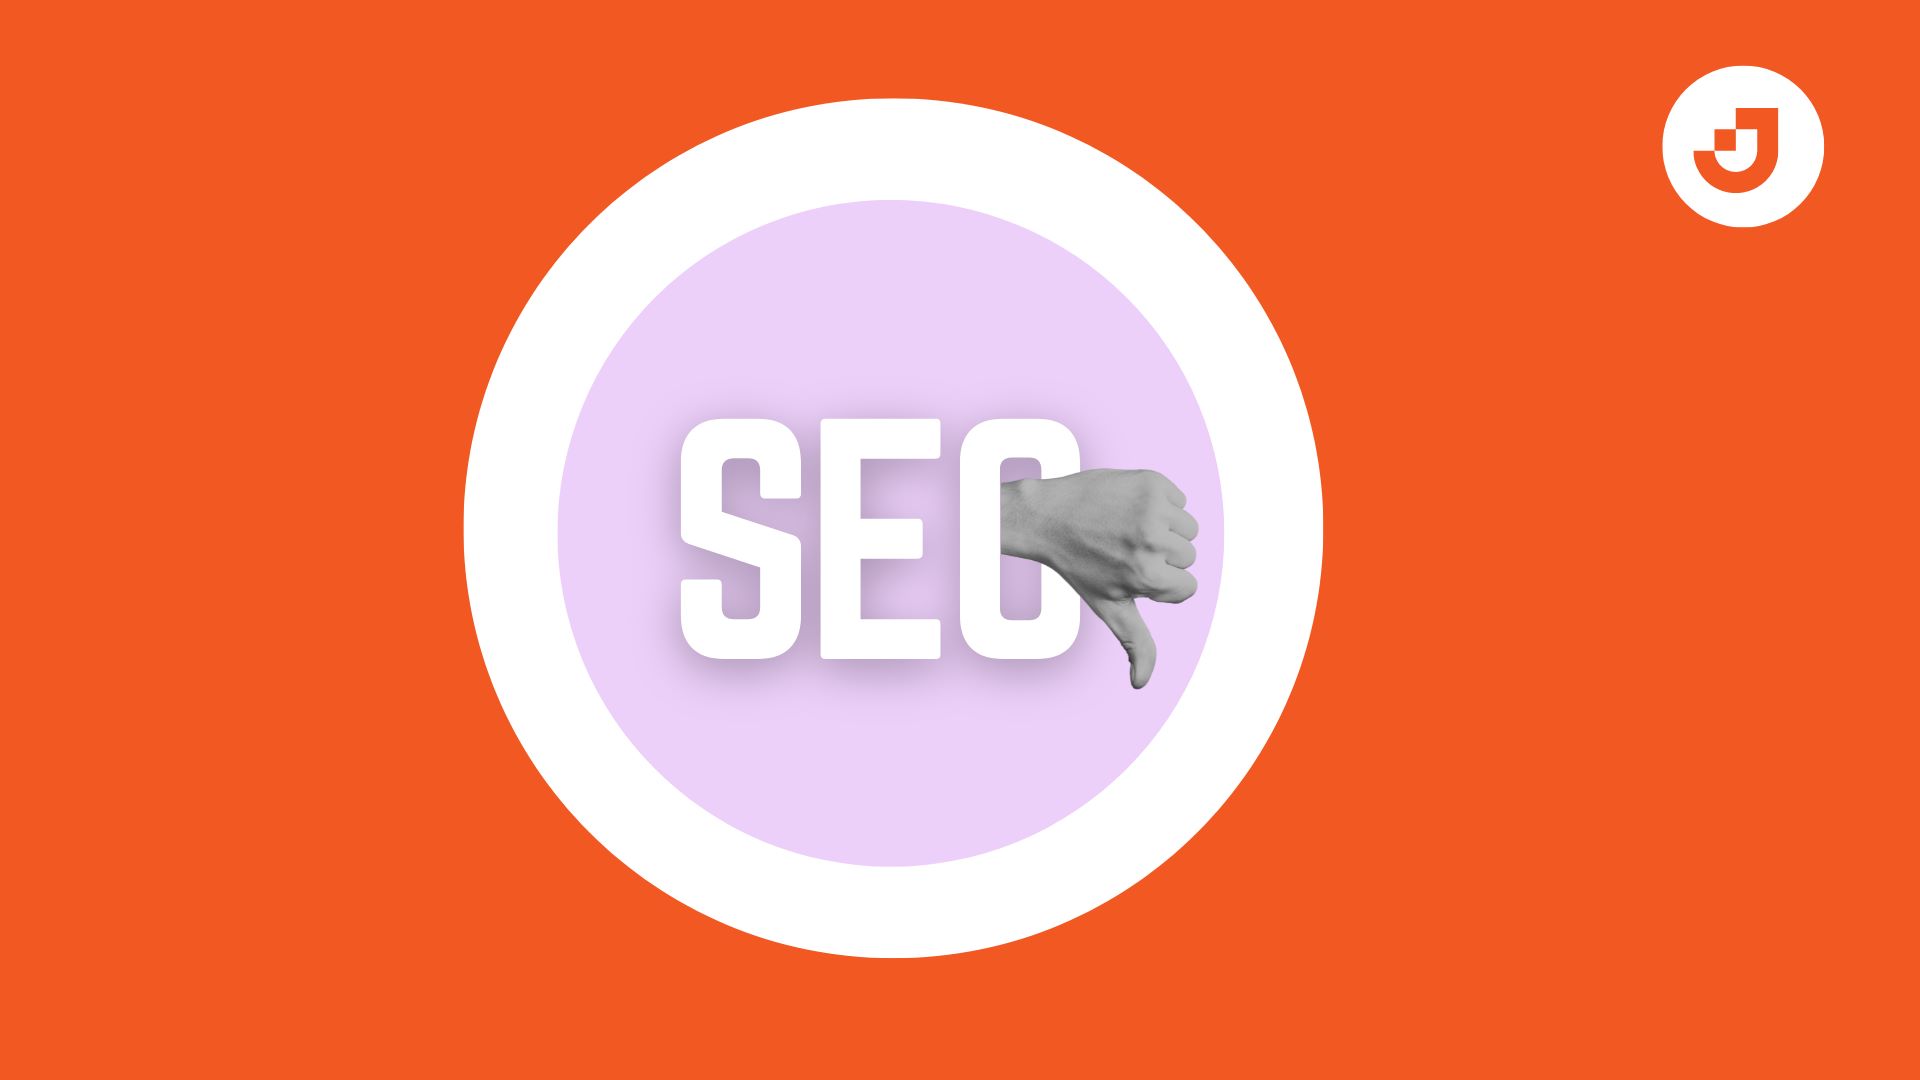 Outdated SEO Tactics